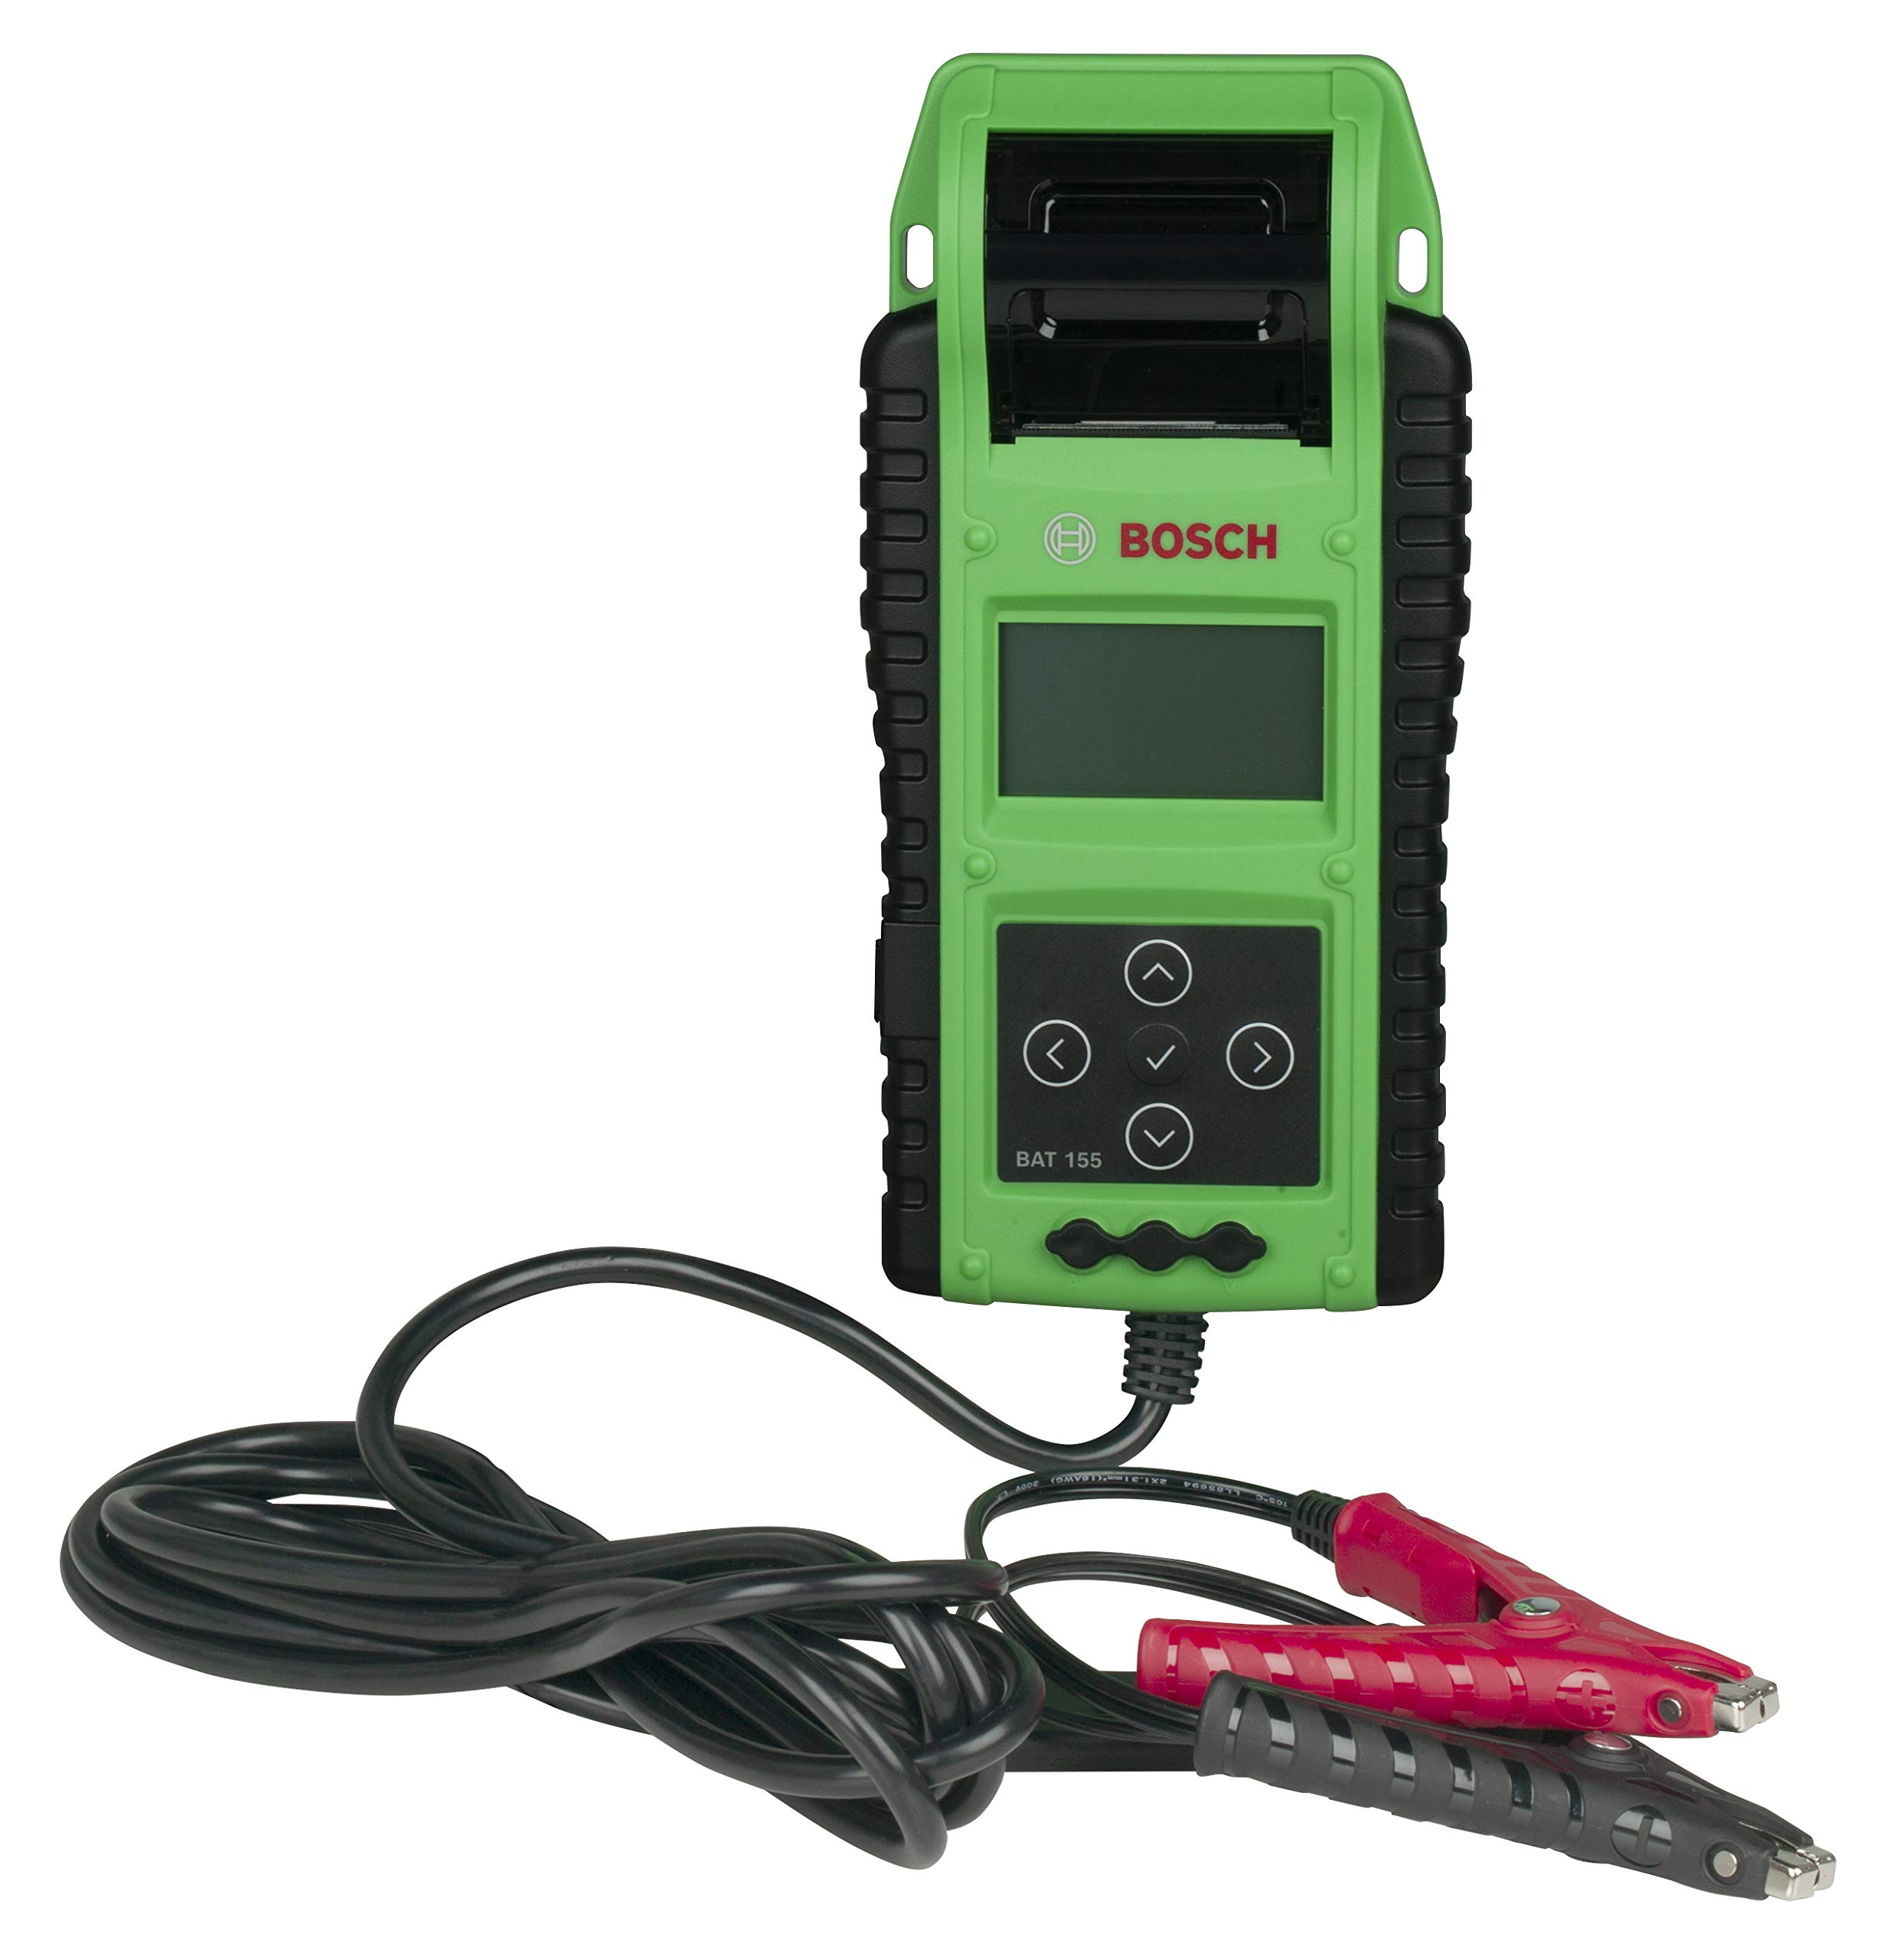 BOSCH BAT155 Heavy Duty Battery Tester with Integrated Printer - Use with 6V and 12V Batteries, 12V and 24V Charging Systems, Large